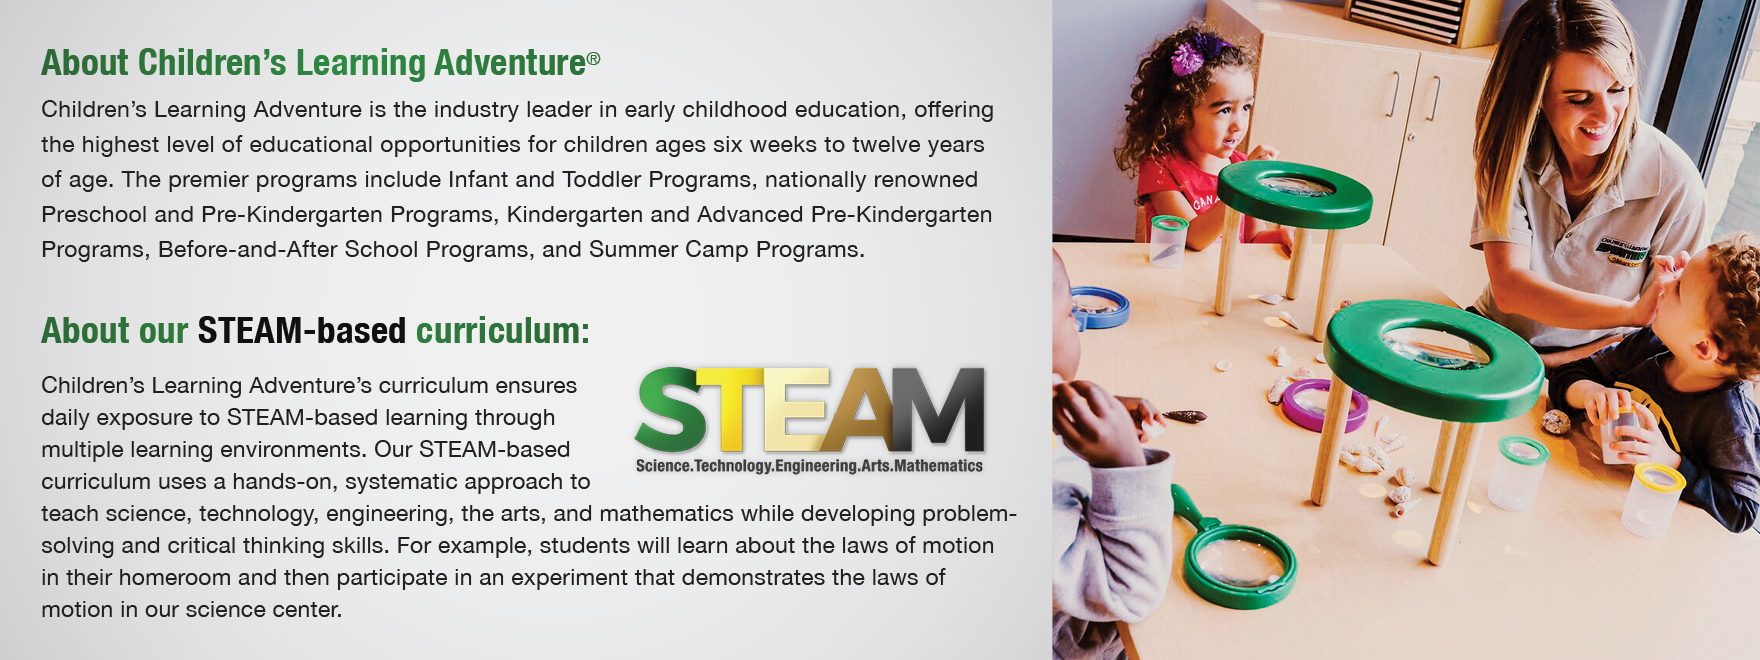 school STEAM based learning Image